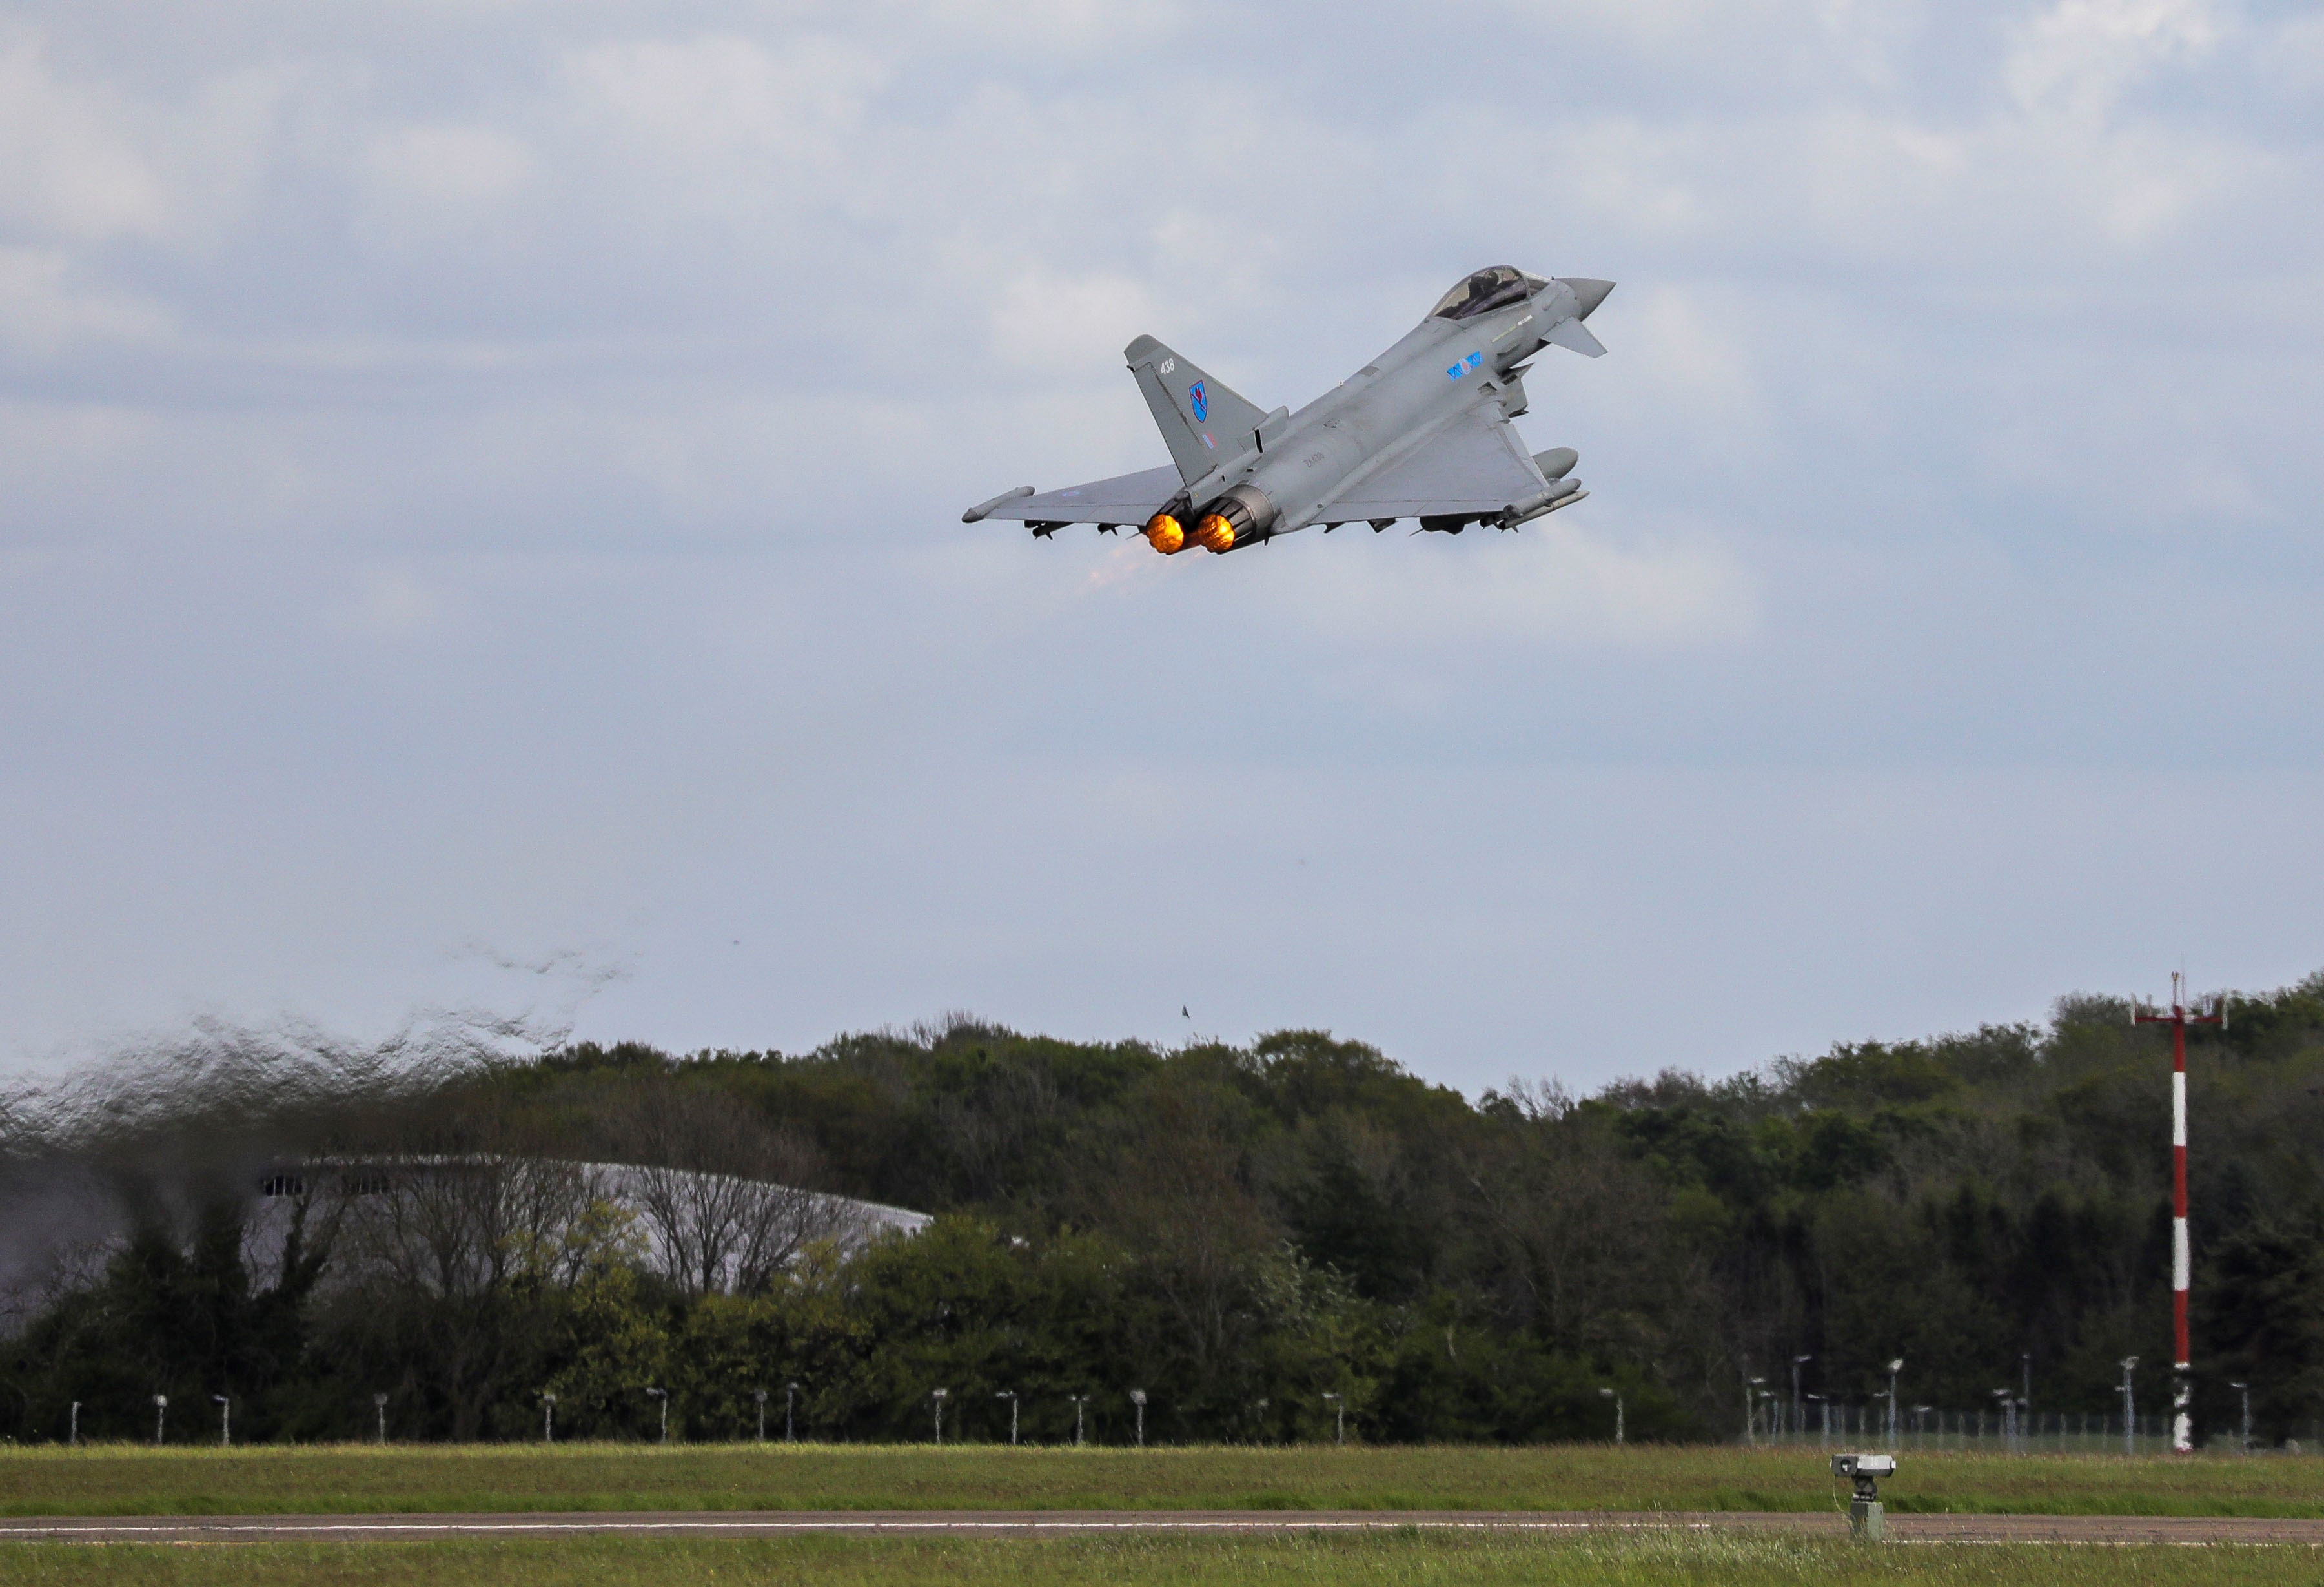 Typhoon taking off from the runway.